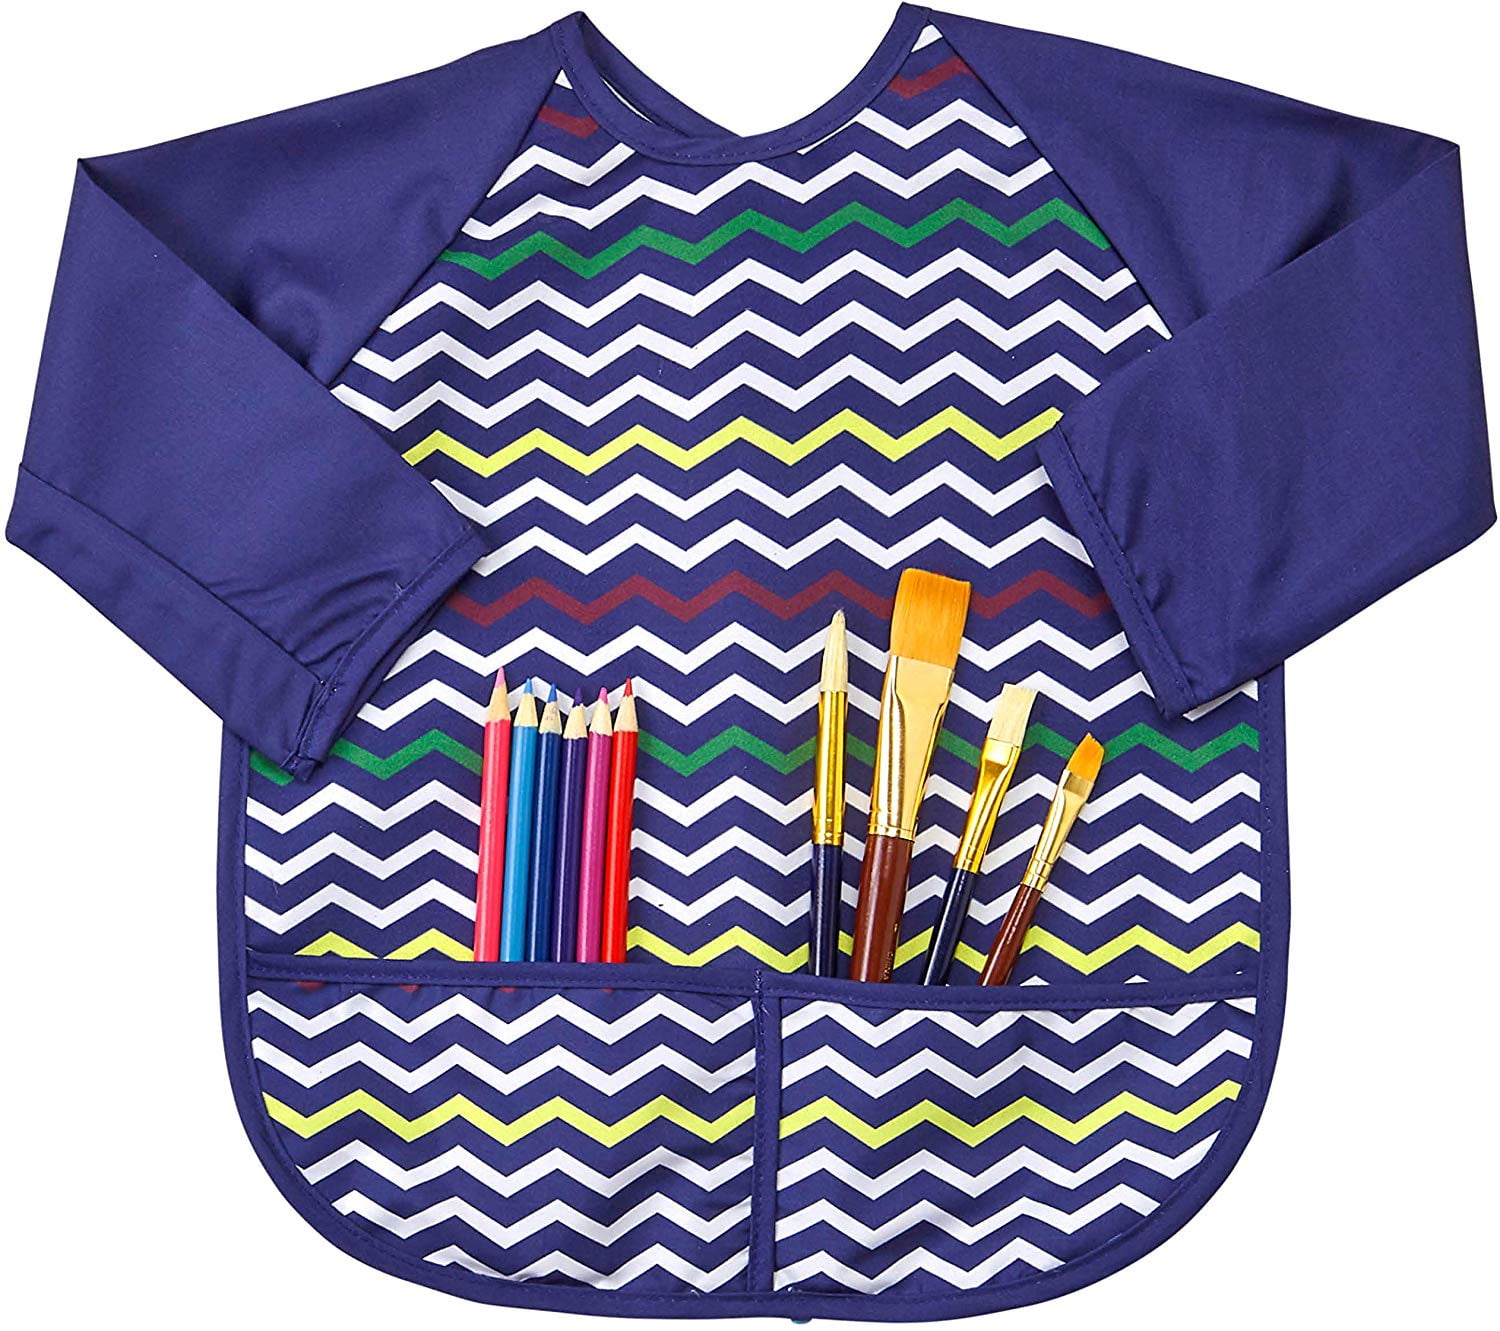 Abstract Kids Art Smock Apron Premium Quality Microfiber with Vinyl Lining 2 Pockets Red Crayon Long Sleeve Waterproof Bib for Painting Extra Large Feeding and More 